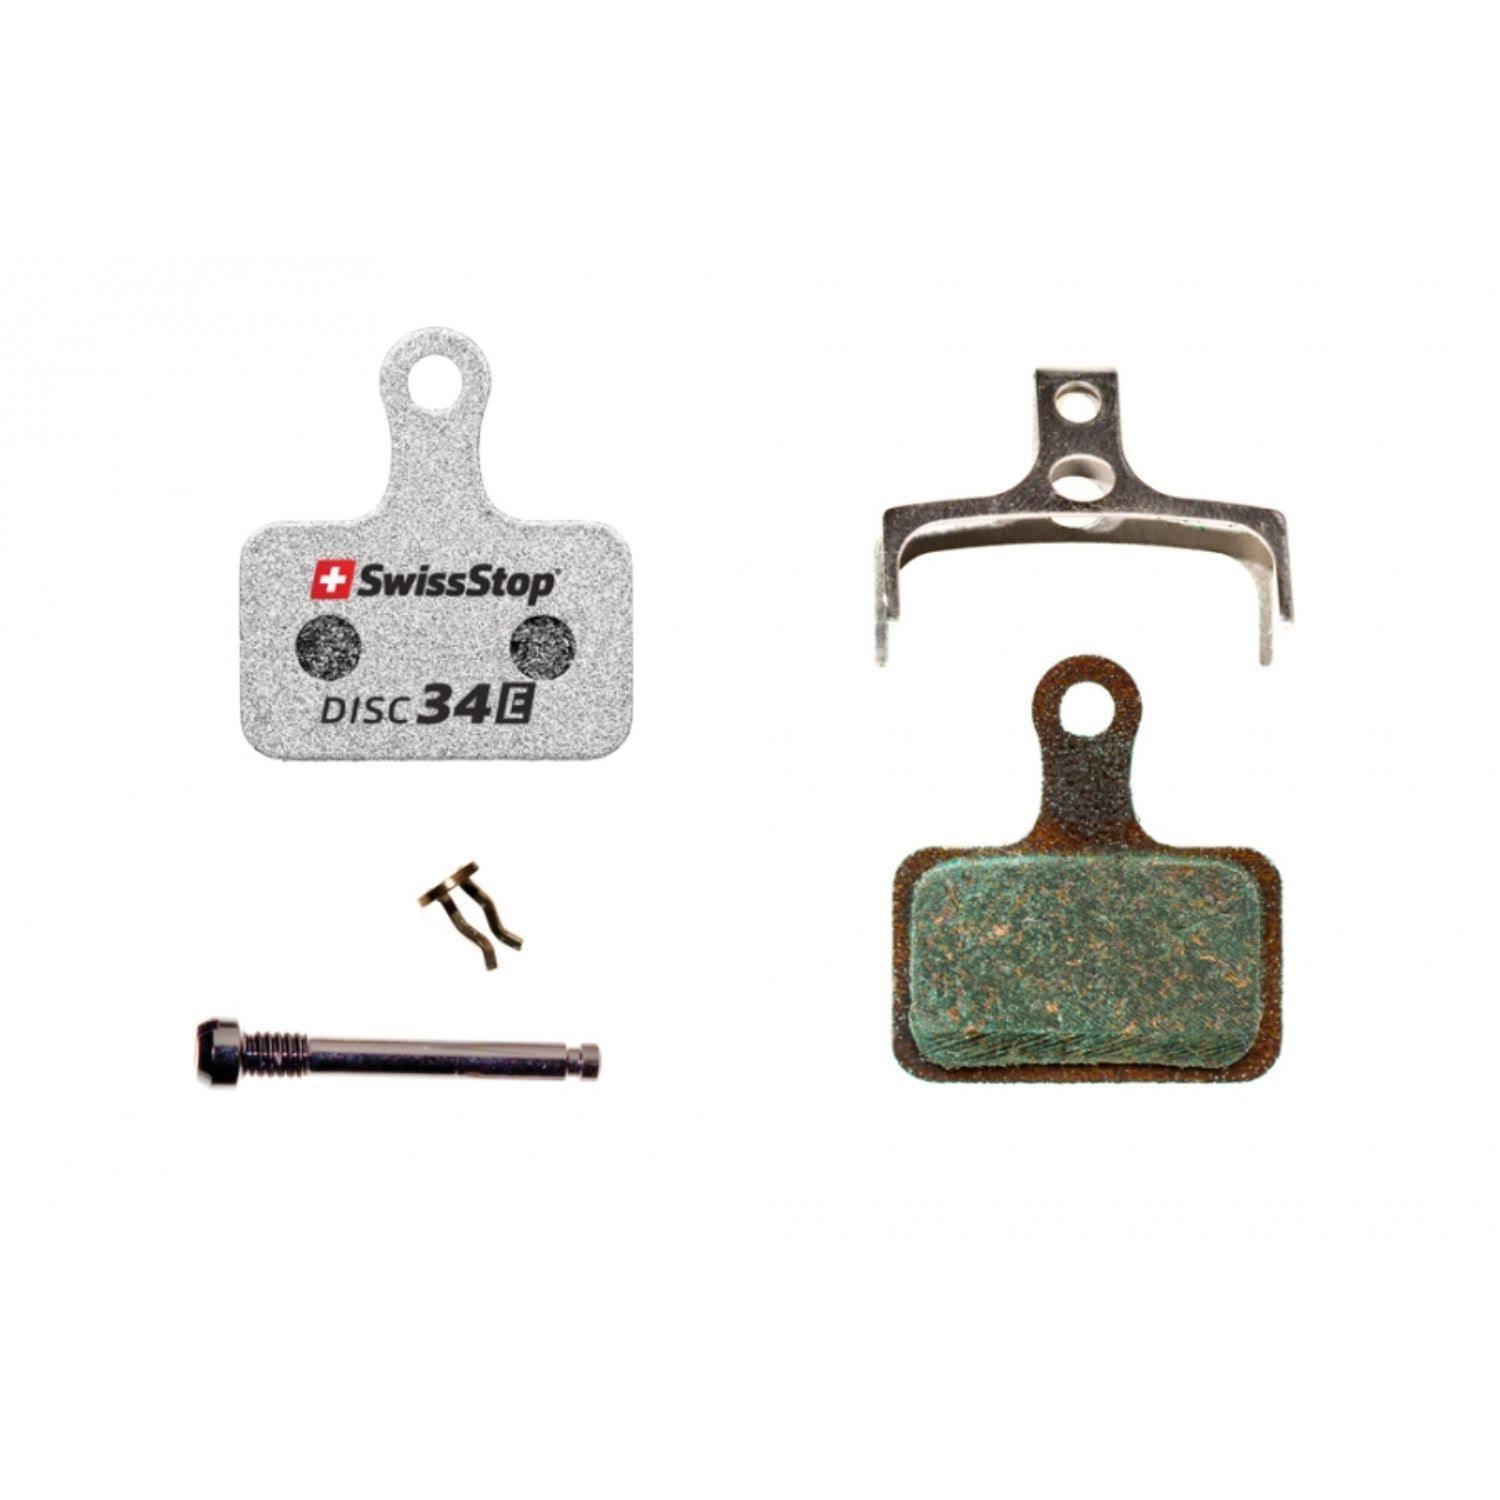 SwissStop Disc E Brake Pads Disc - Shimano BR-RS805, Size 34